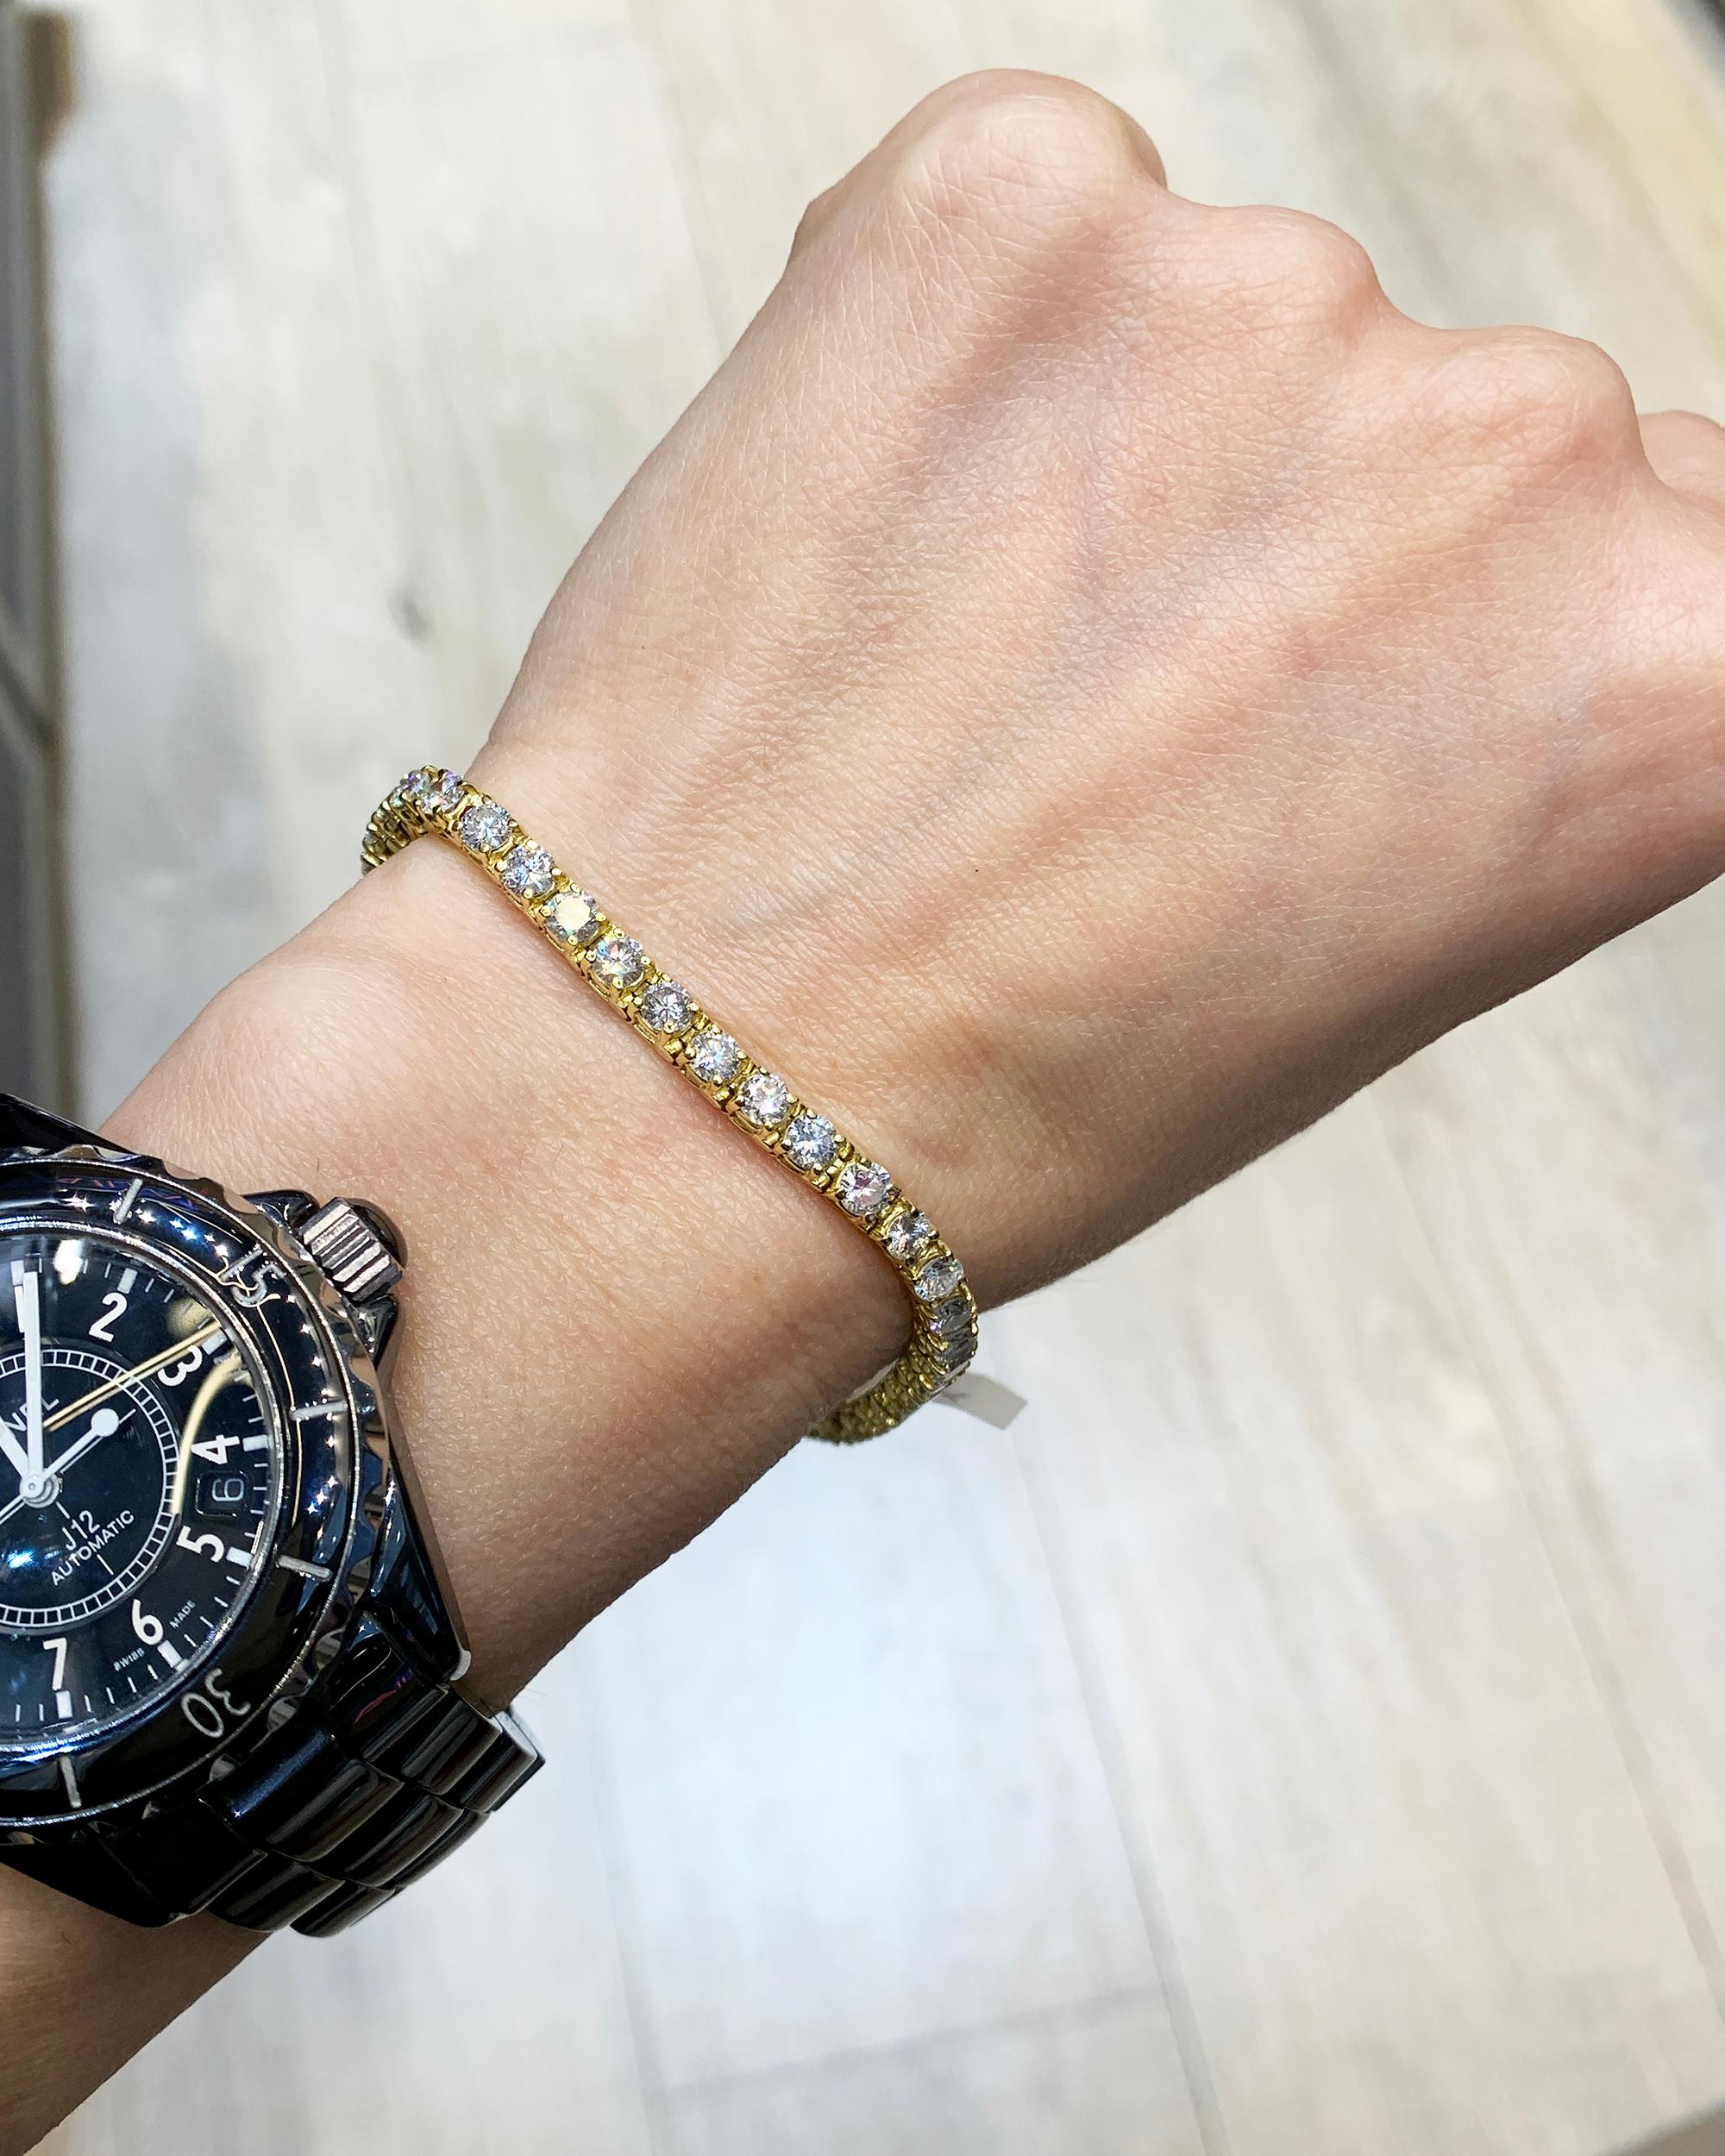 A beautiful and classic tennis bracelet decorated with 44 round diamonds and set in 18K yellow gold.
Total weight of the diamonds is 6.60 carats, approximately 0.15 carats each.
The diamonds are not certified and are equivalent to G-H colors, VS-SI